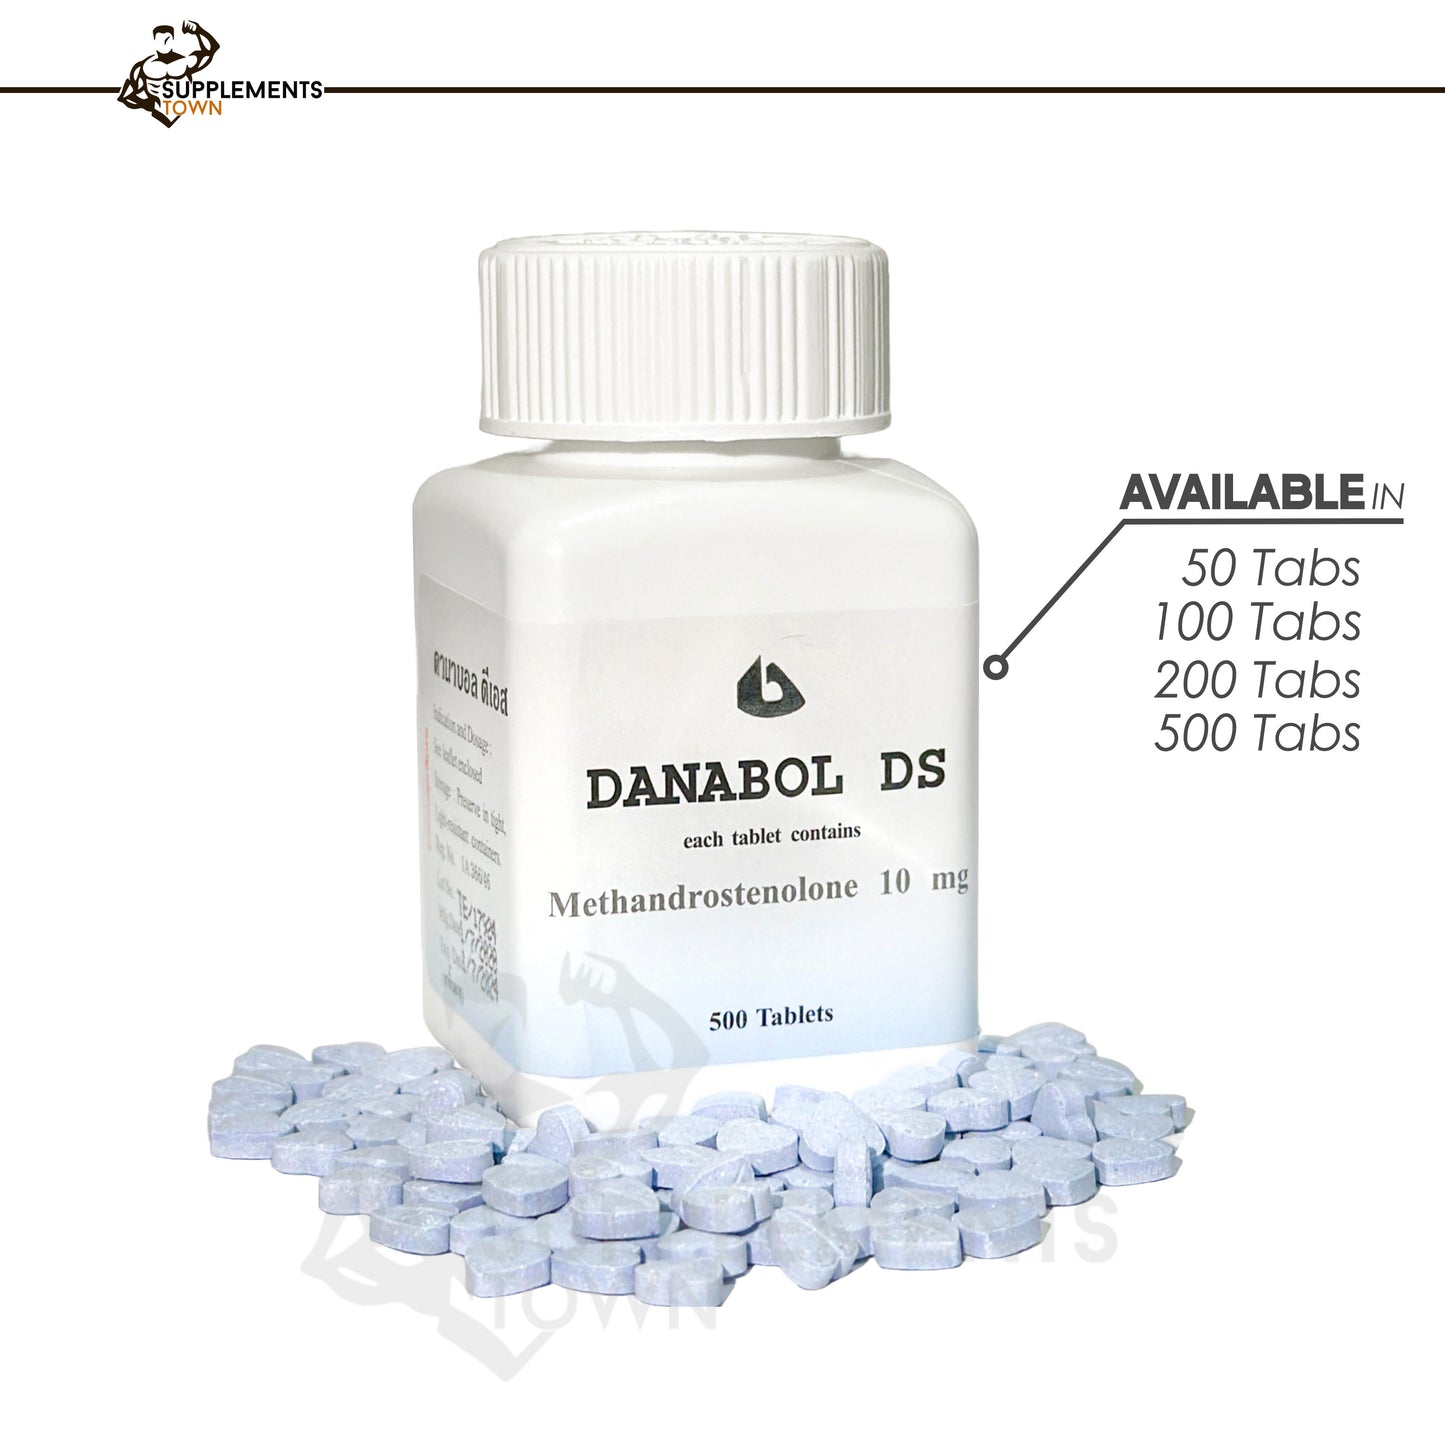 DANABOL DS / DIANABOL / METHANDROSTENOLONE 10MG - 500 TABLETS - EXP. DATE 1/7/2027